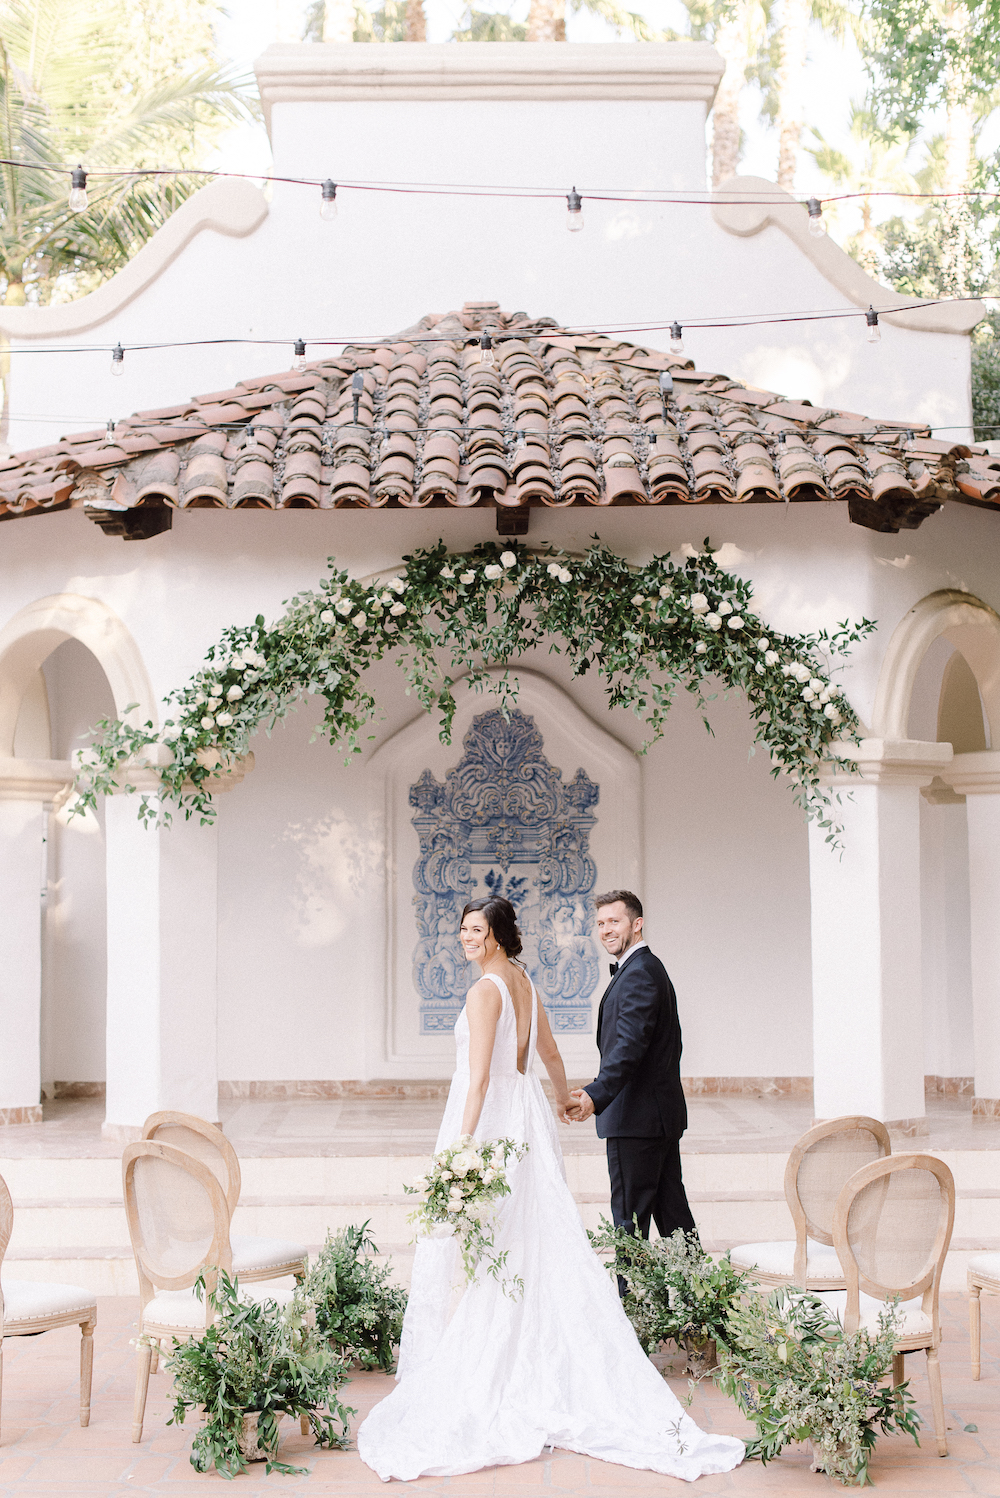 Micro-Wedding at Rancho Las Lomas by Lucky Day Events Co. / Dusty Blue Wedding Table / Intimate Wedding Table / Blue Wedding / Archive Rentals / Greenery Ceremony